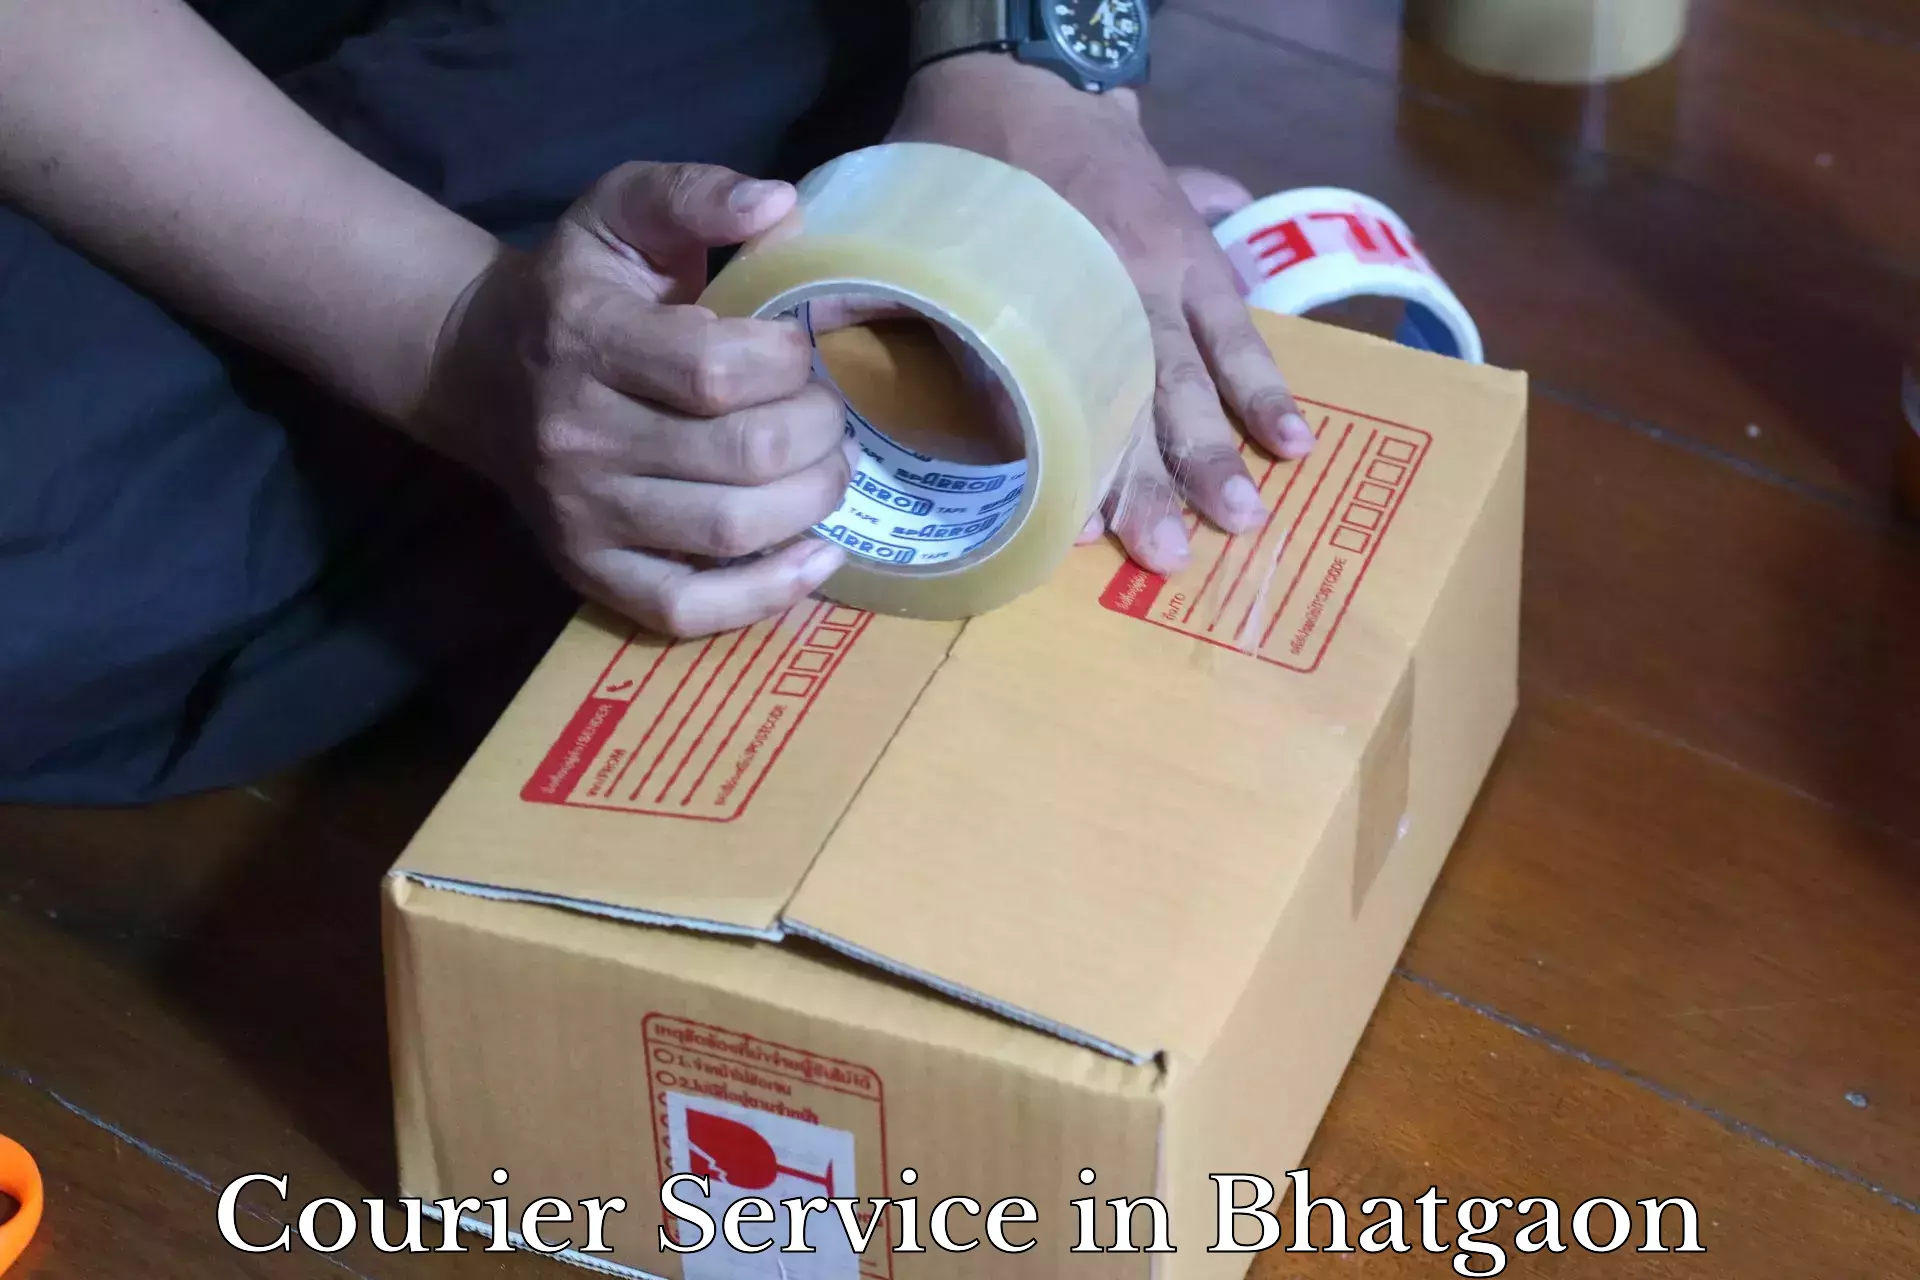 Innovative shipping solutions in Bhatgaon